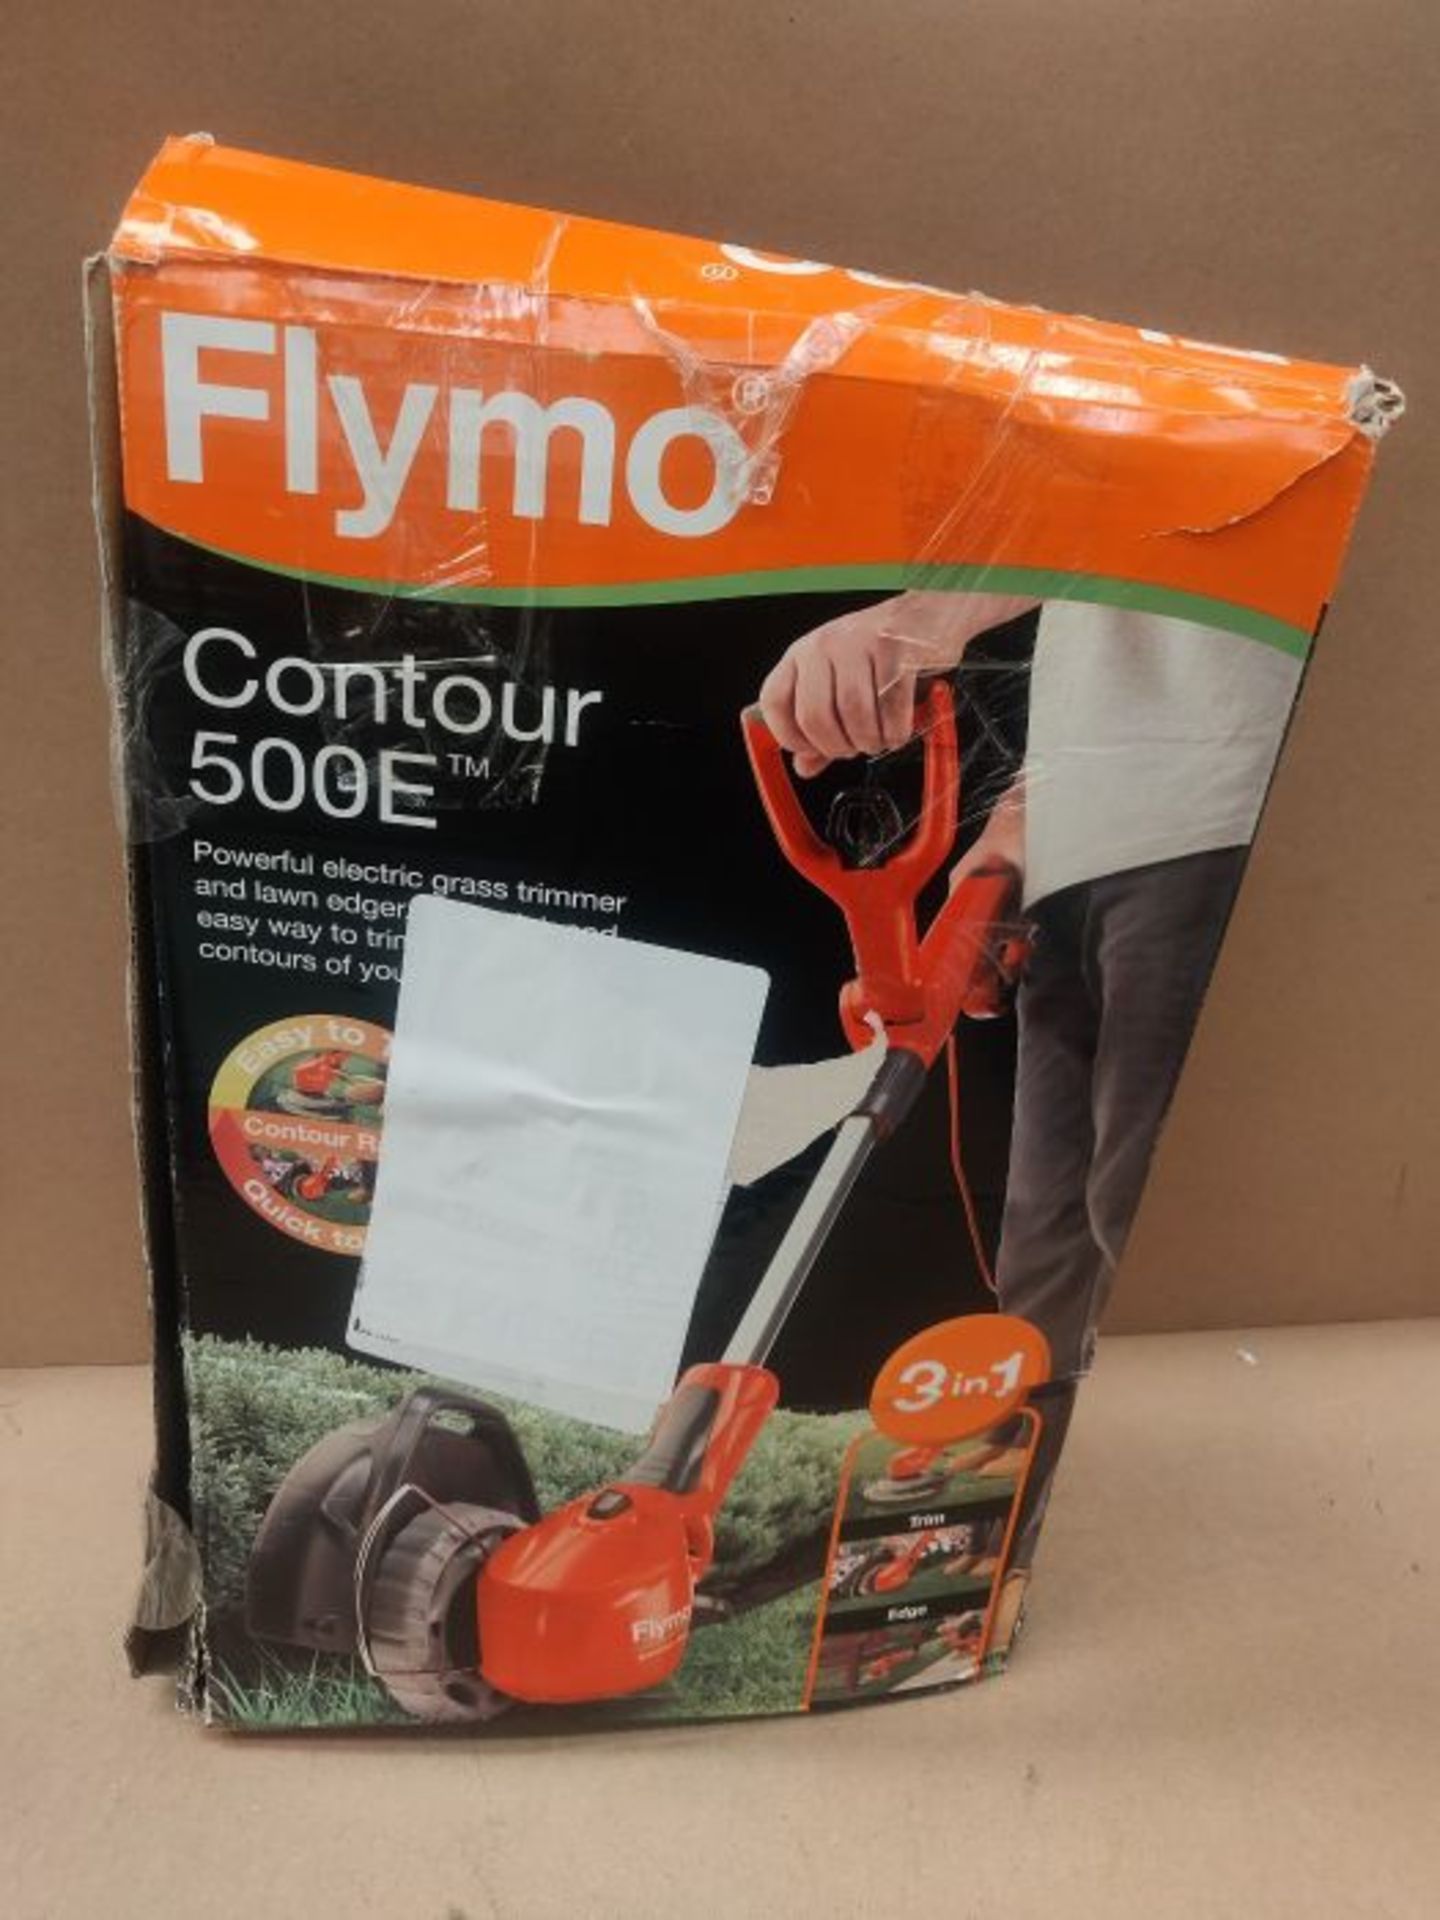 Flymo Contour 500E Electric Grass Trimmer and Edger, 500 W, Cutting Width 25 cm - Image 2 of 3